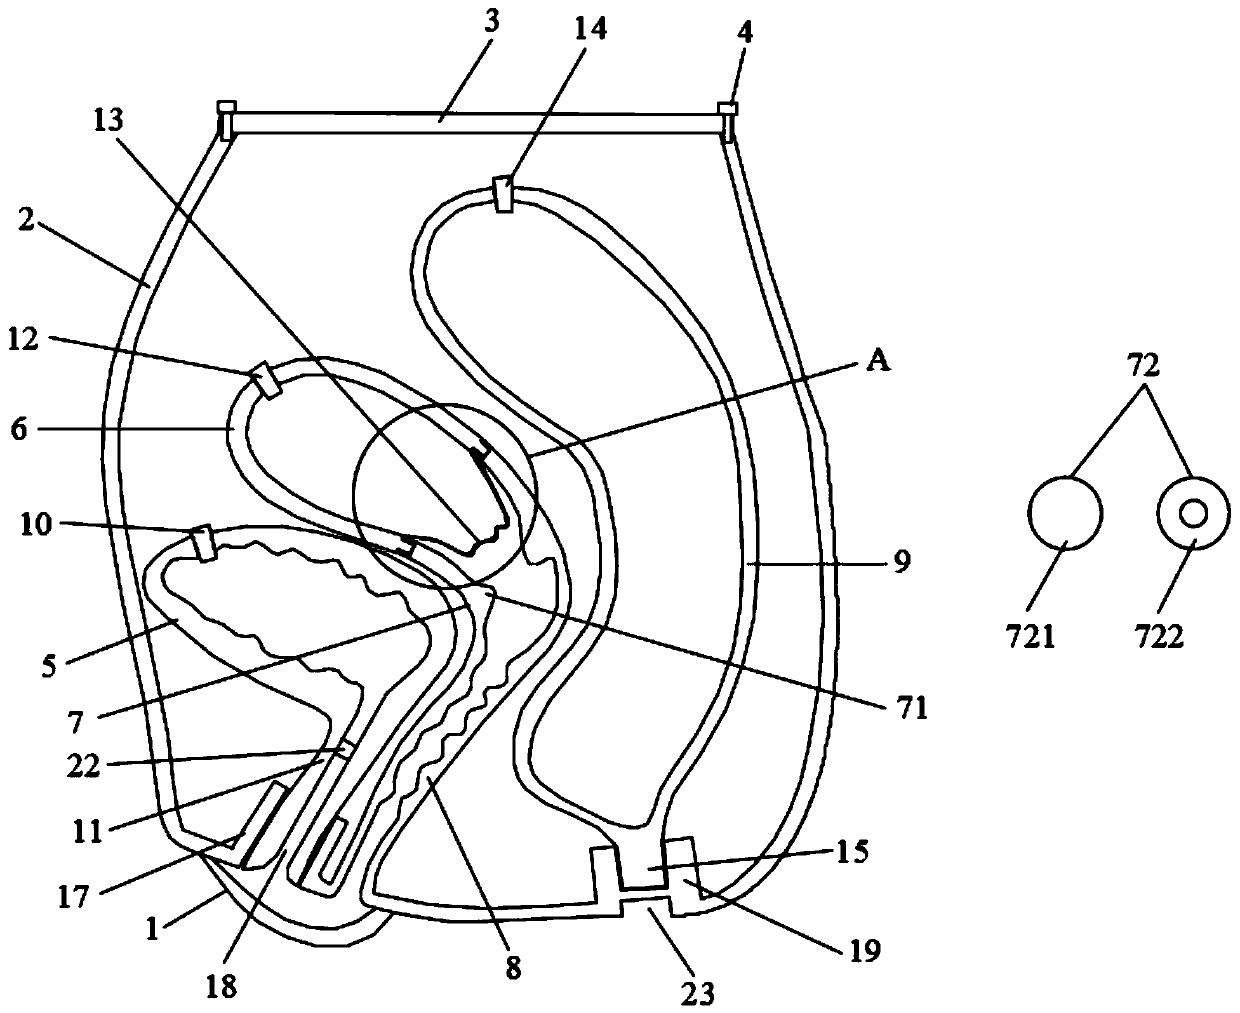 High-fidelity and detachable cervical cerclage simulation teaching model and teaching method